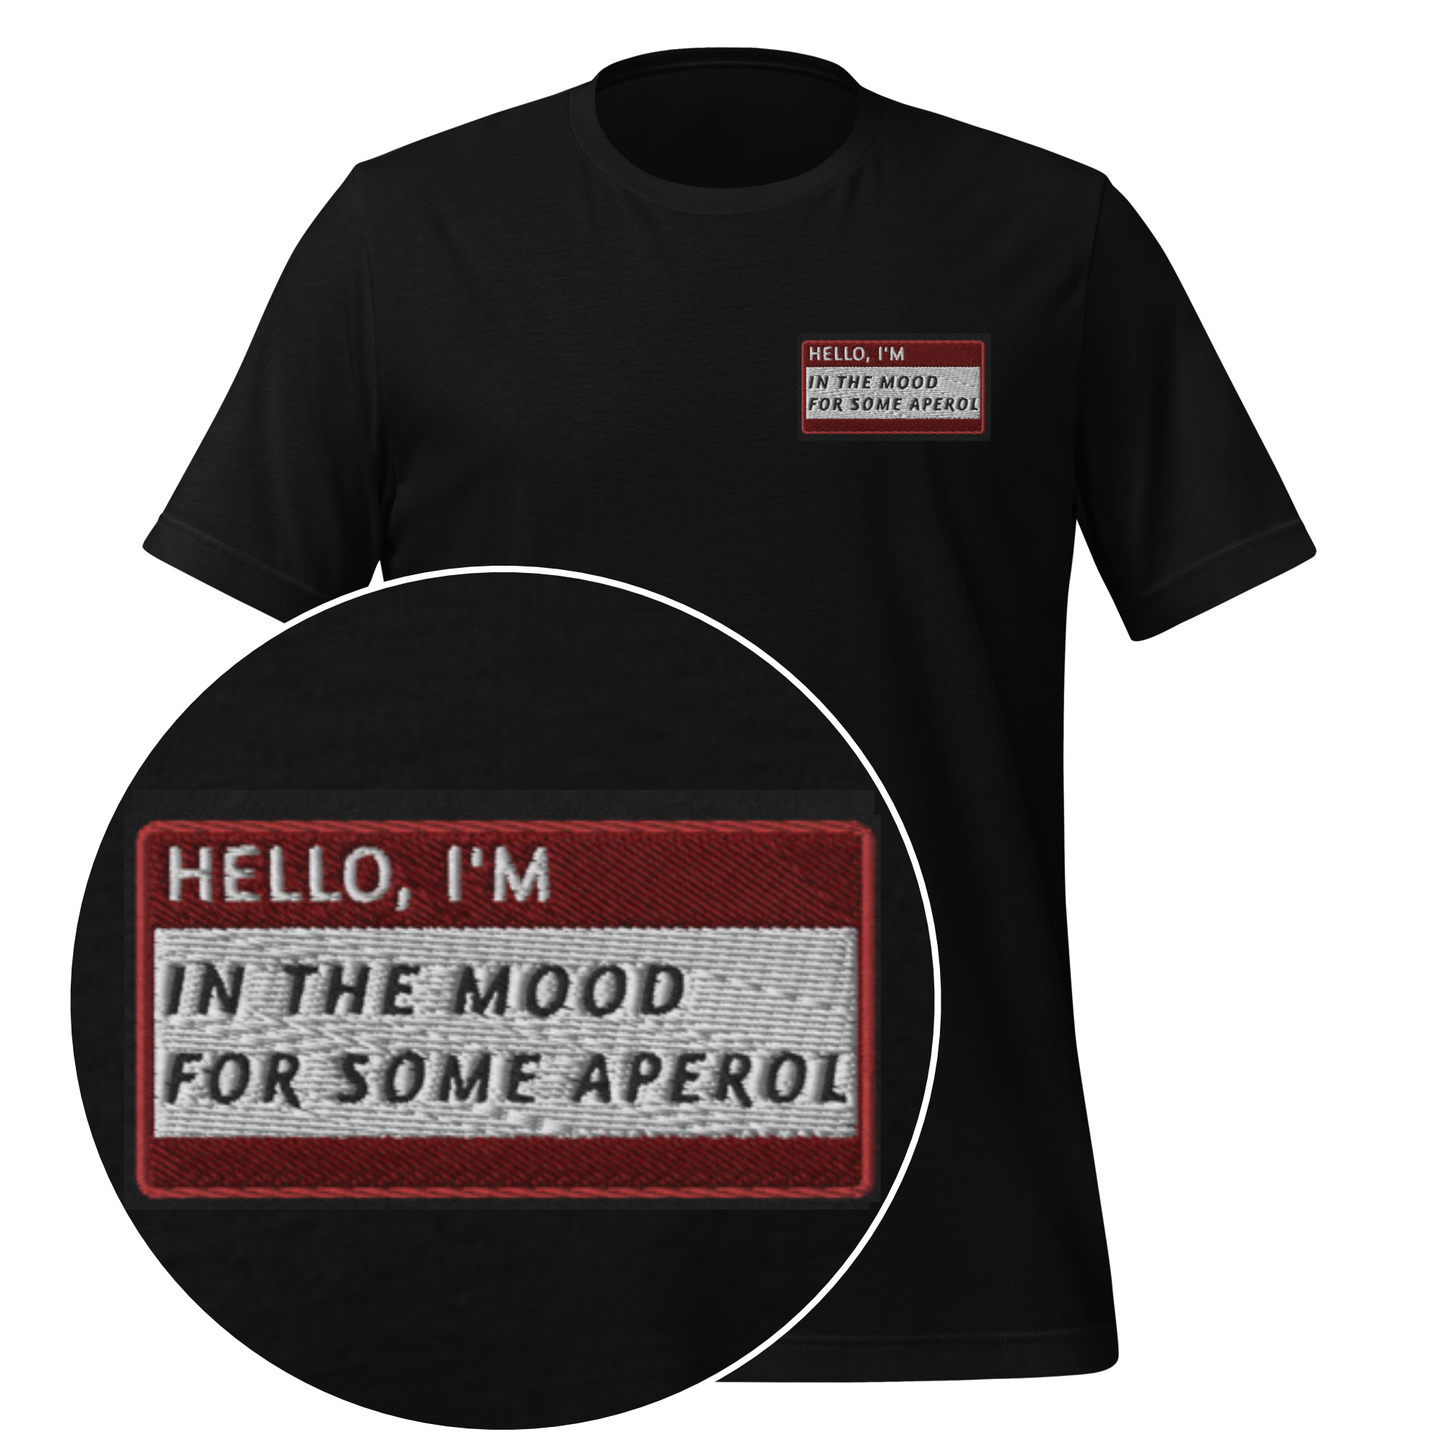 HELLO I'M IN THE MOOD FOR SOME APEROL - Name Tag T-Shirt